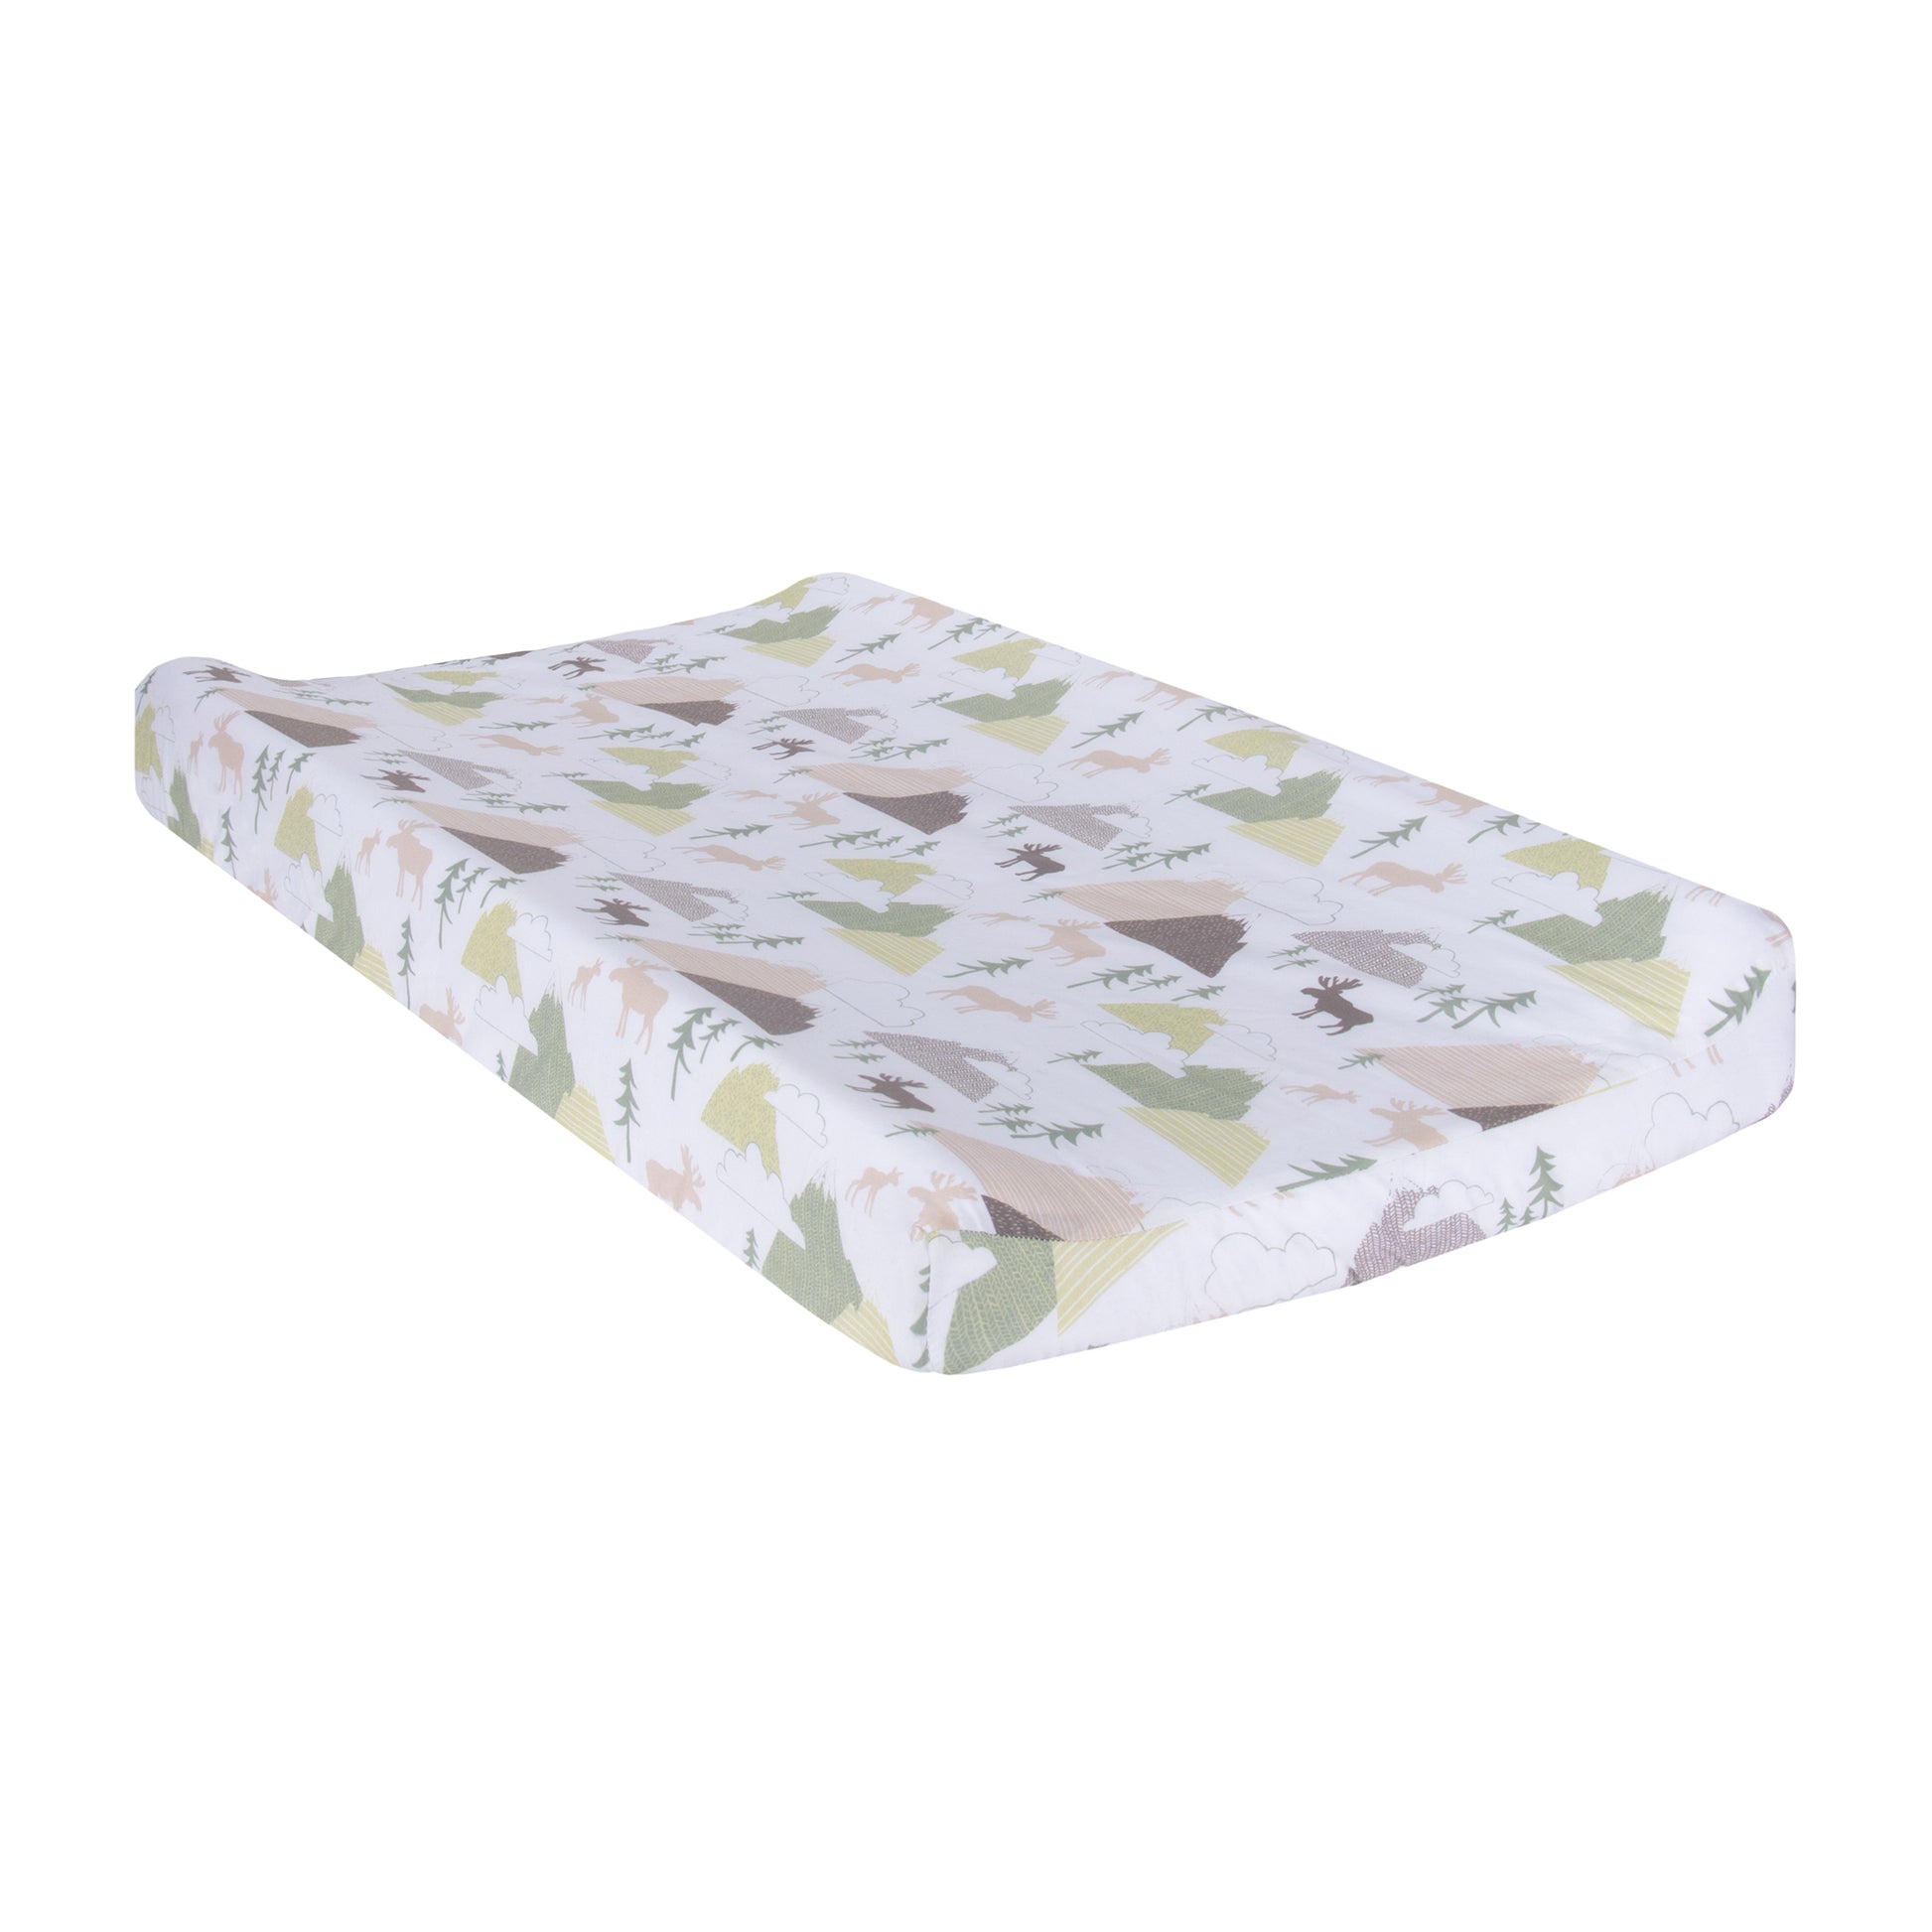 The Mountain Baby Changing Pad Cover features multi-patterned mountains, Mama moose and baby moose and pine trees in multi-hued greens and grays.